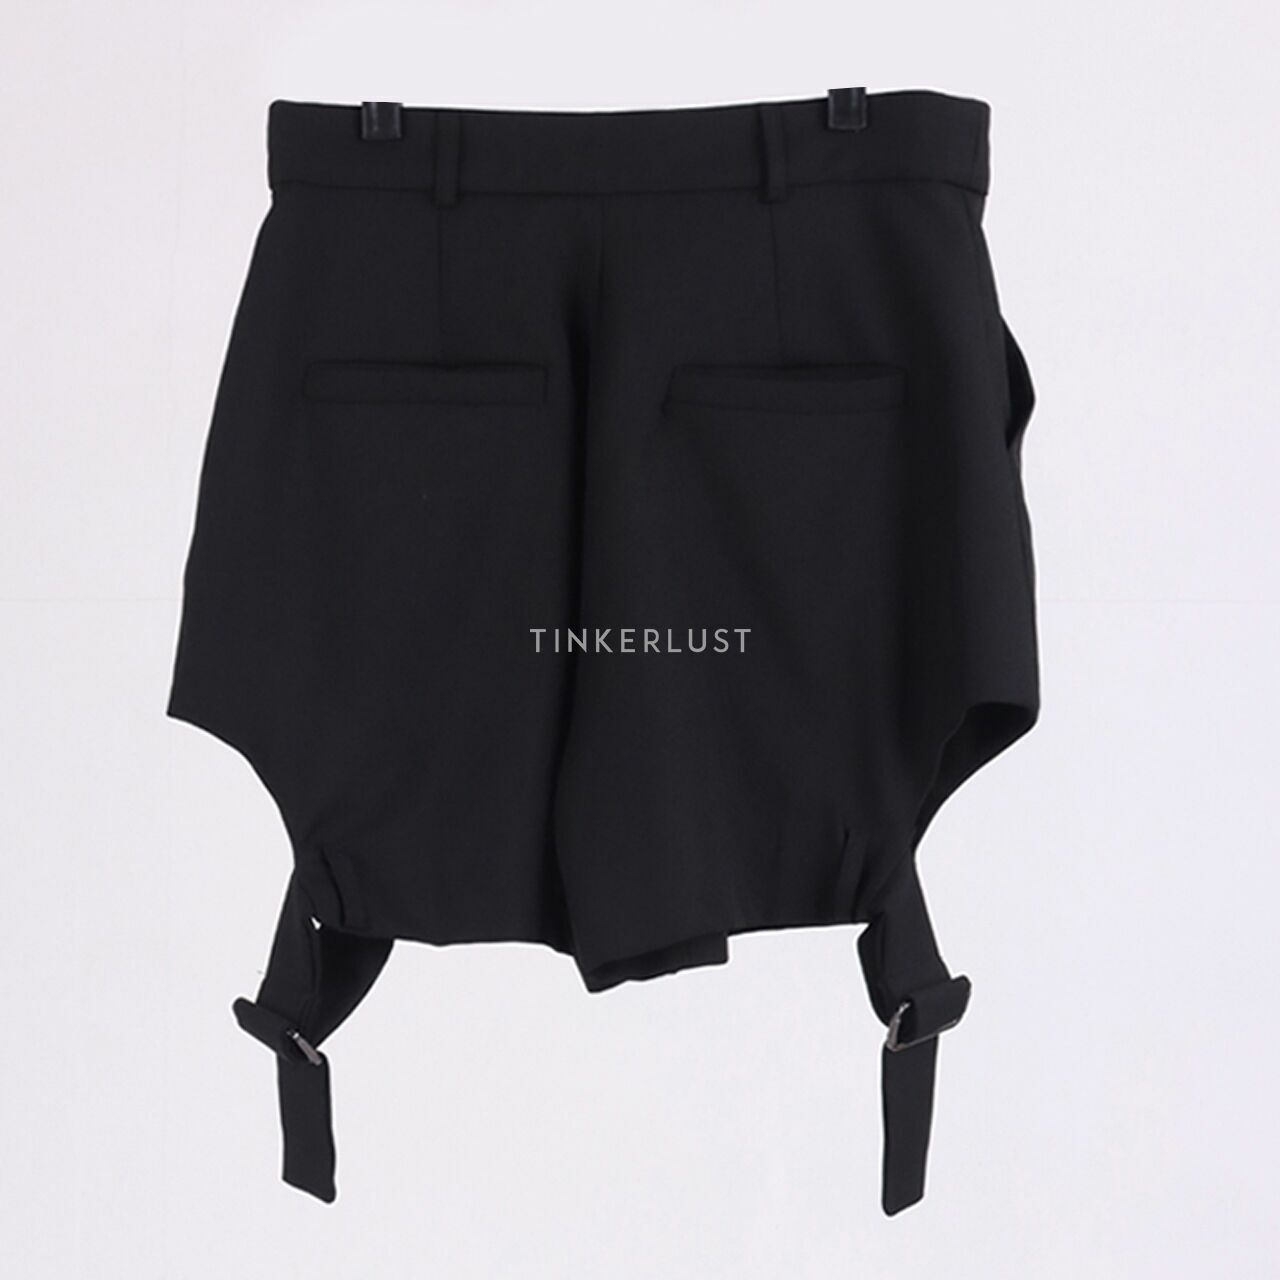 claude by Everyday Black Short Pants